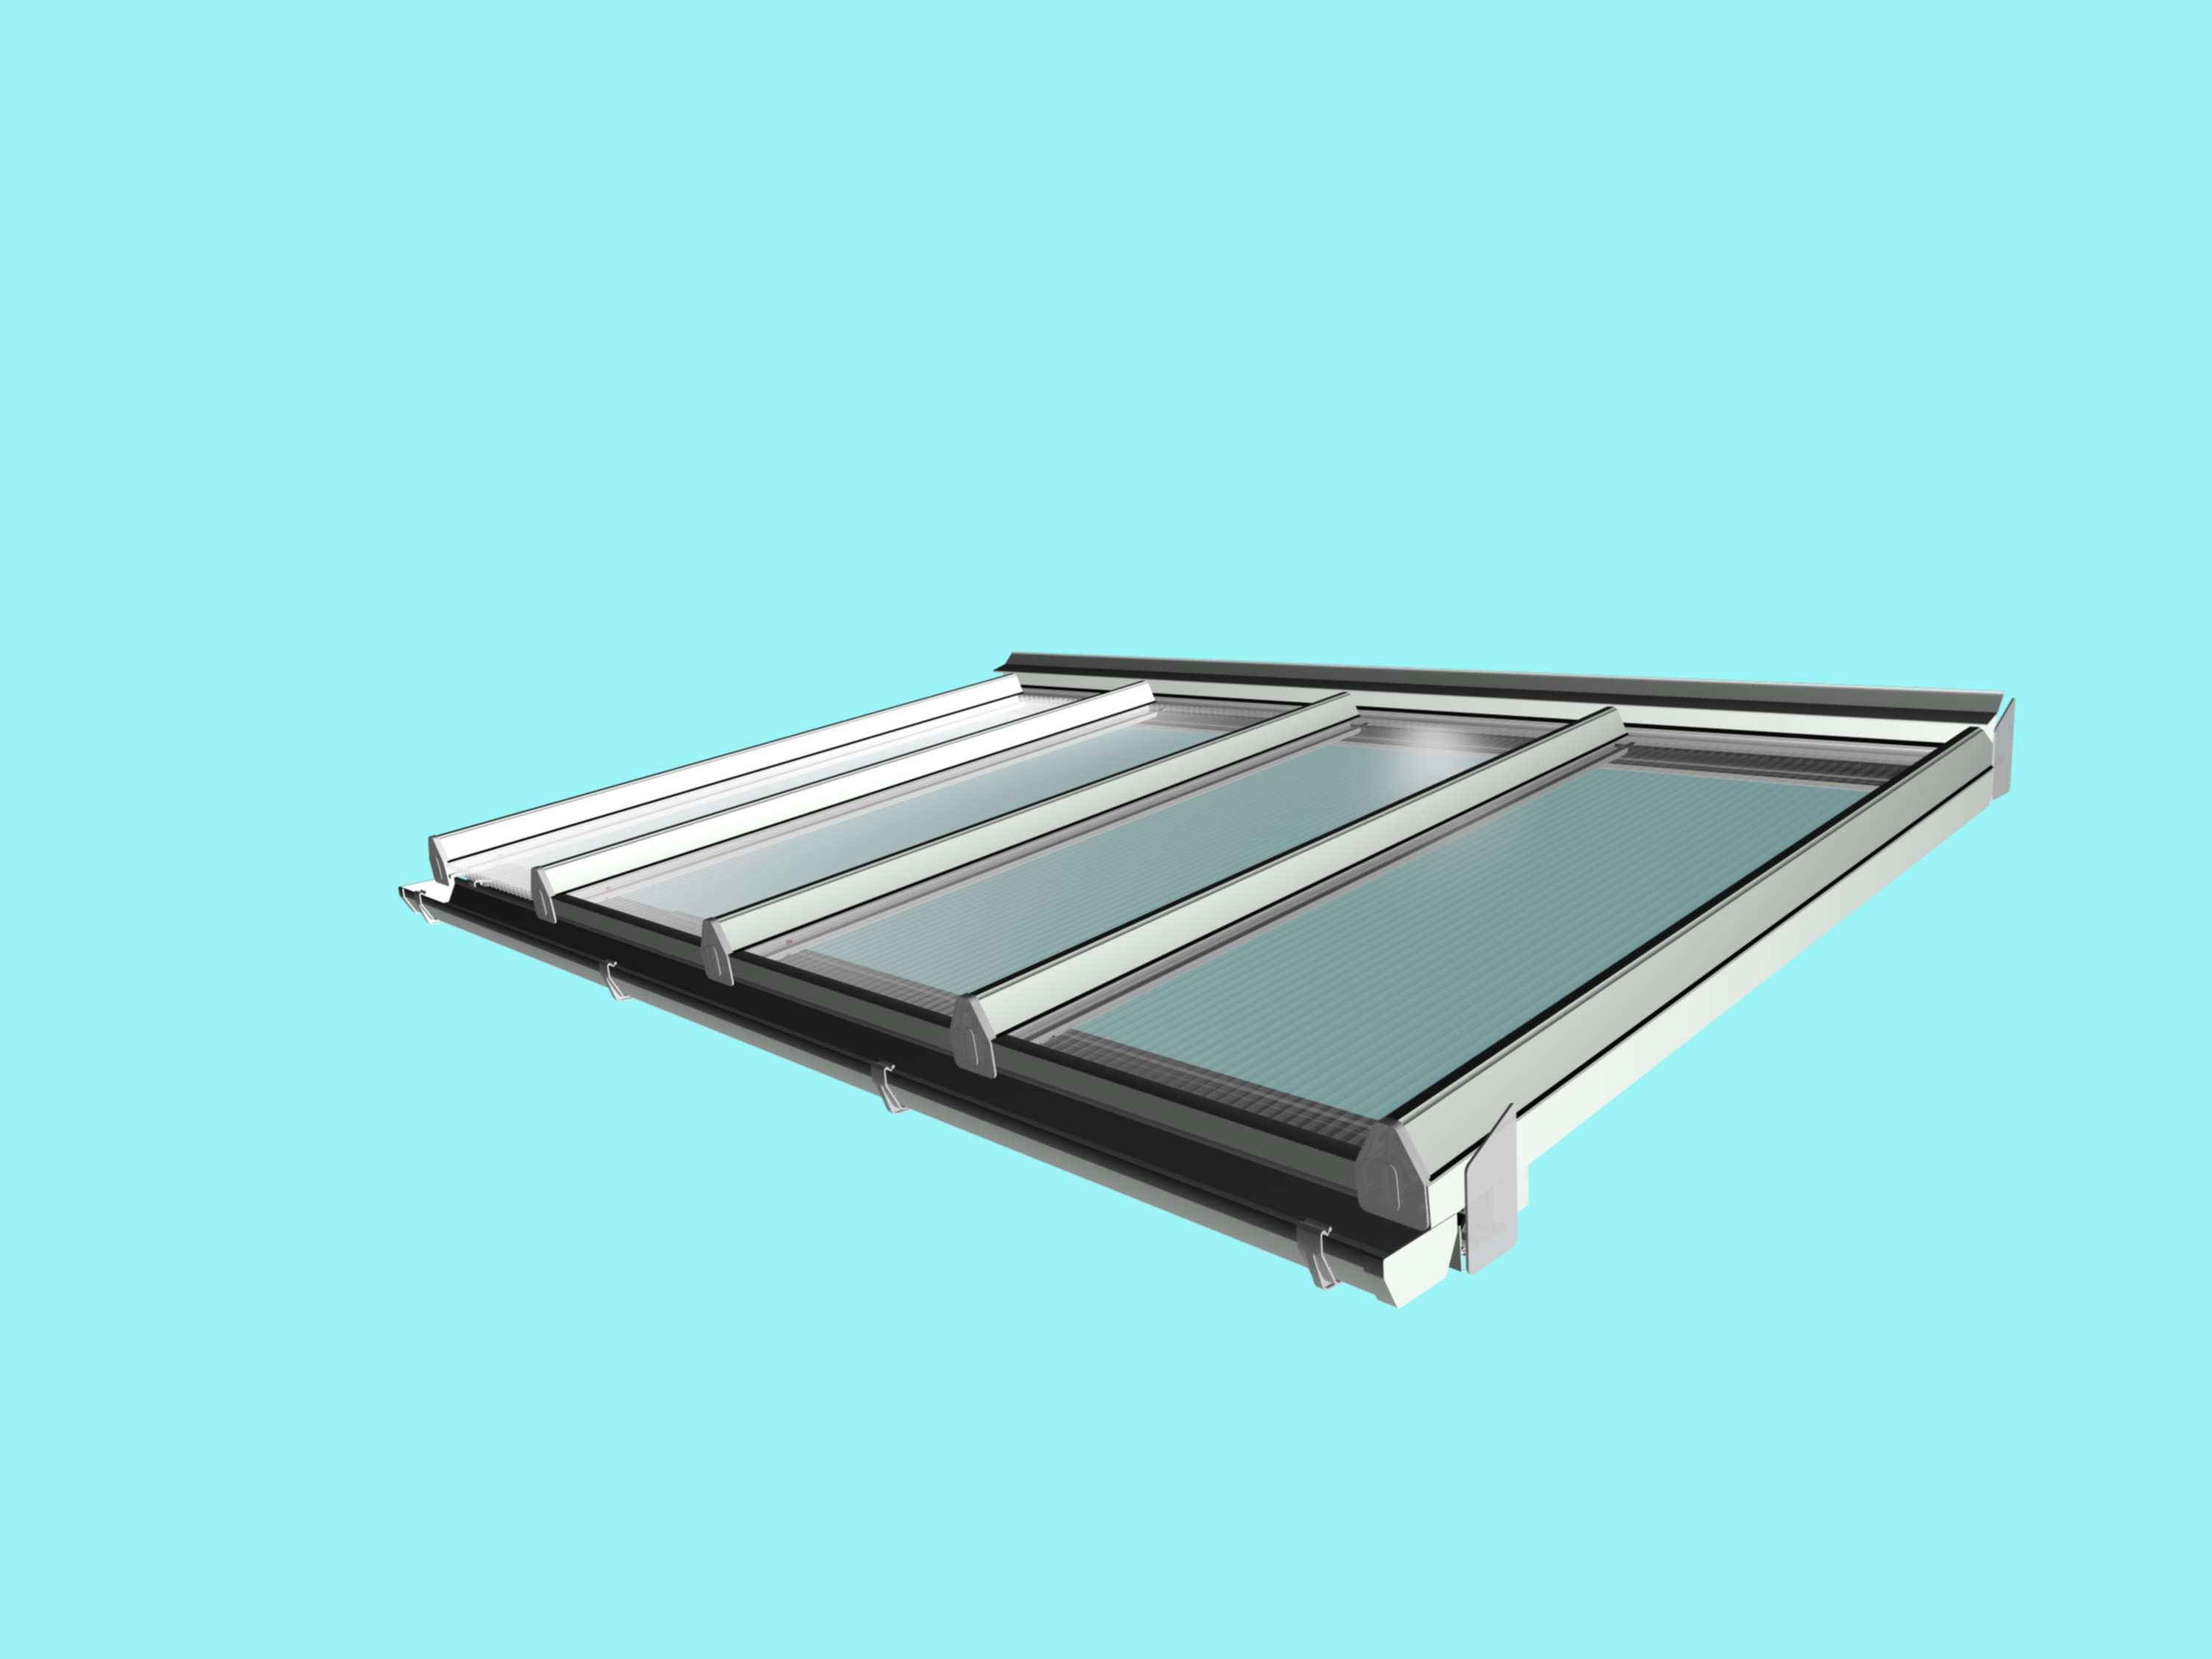 Self-Supporting DIY Conservatory Roof Kit for 25mm polycarbonate, 4.0m wide x 3.5m Projection from Omega Build